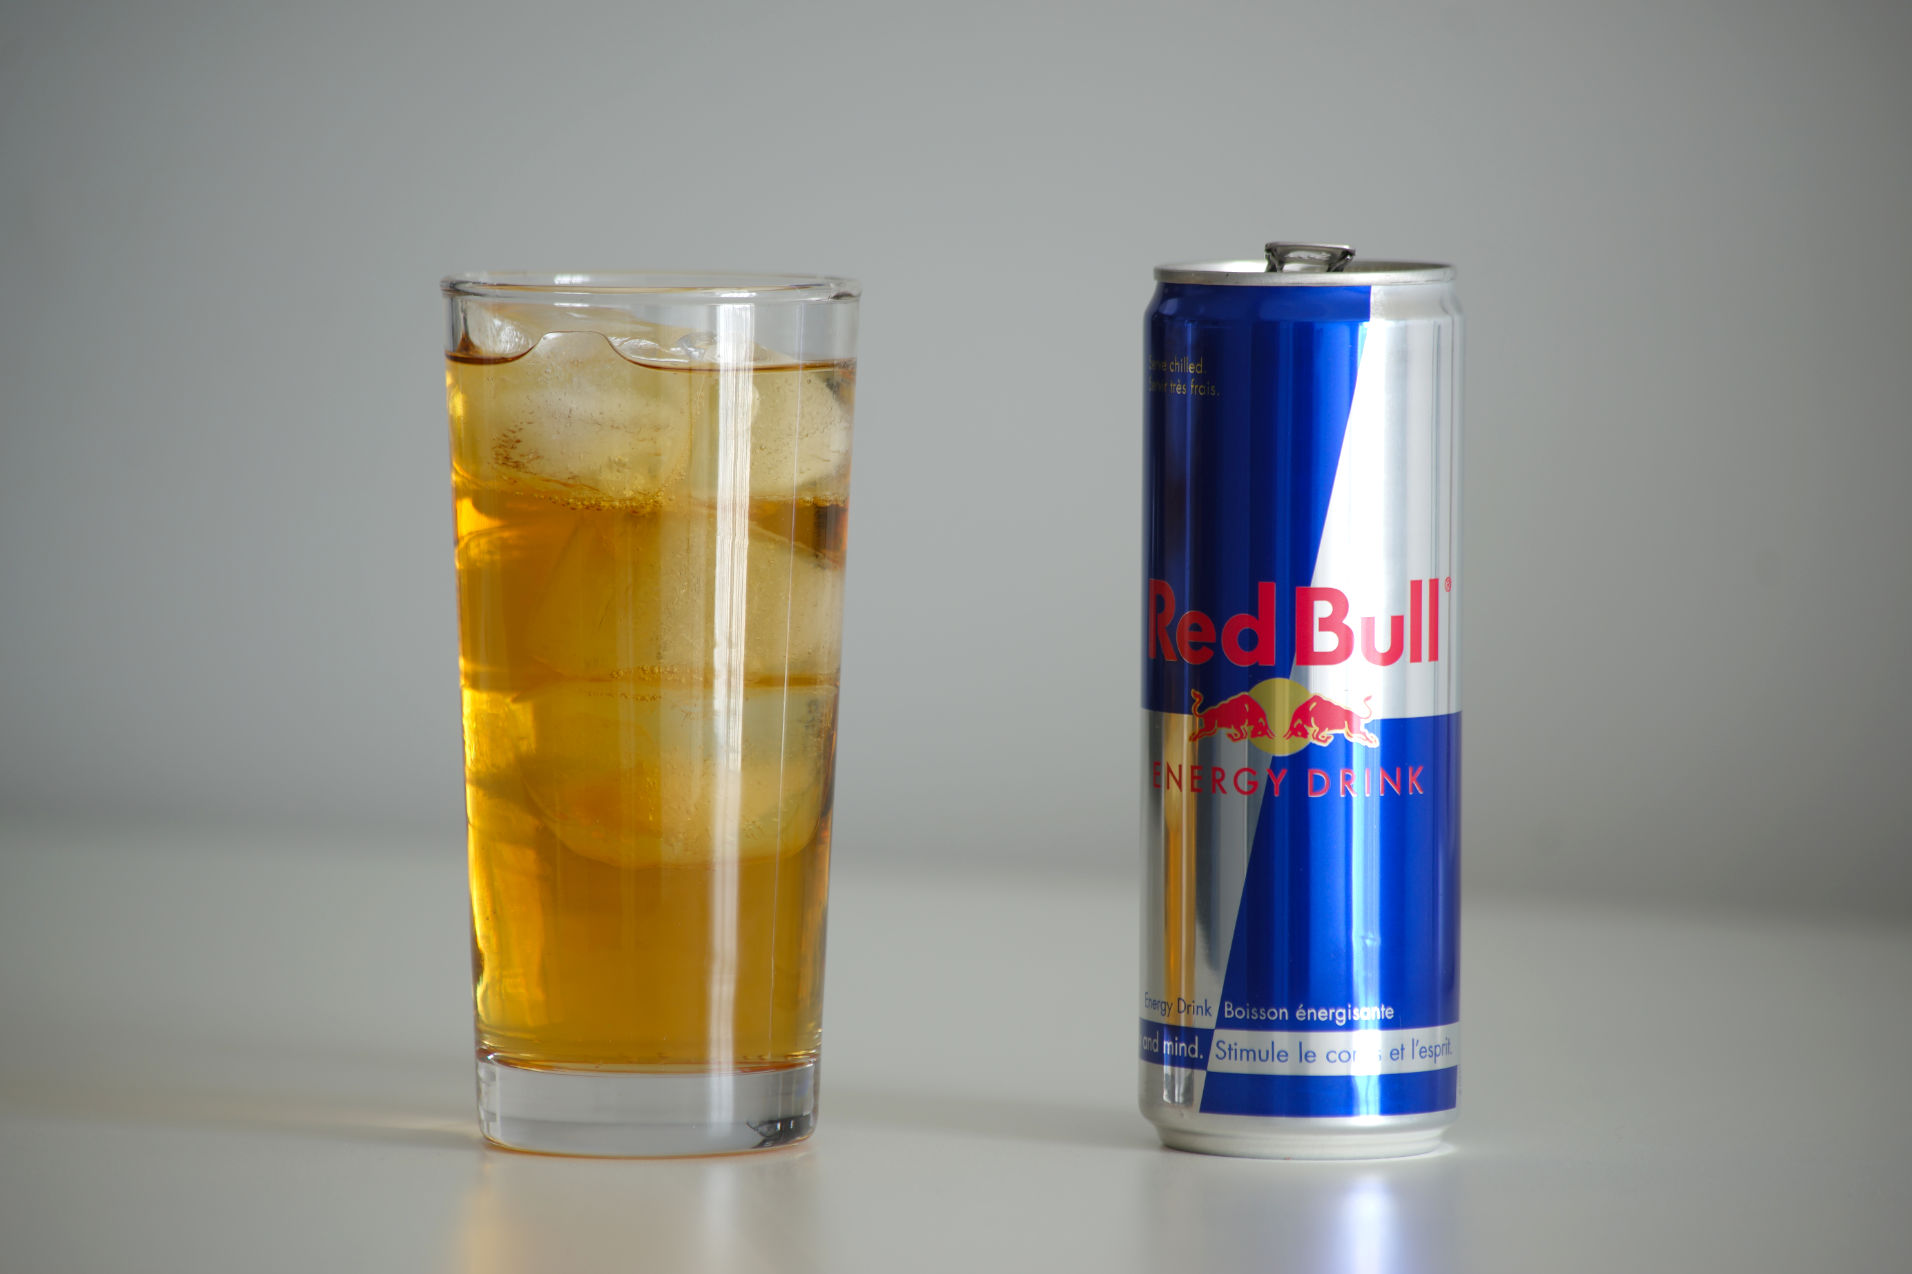 The taste and flavor of energy drinks varies from nuclear horse piss to sweet nectar.